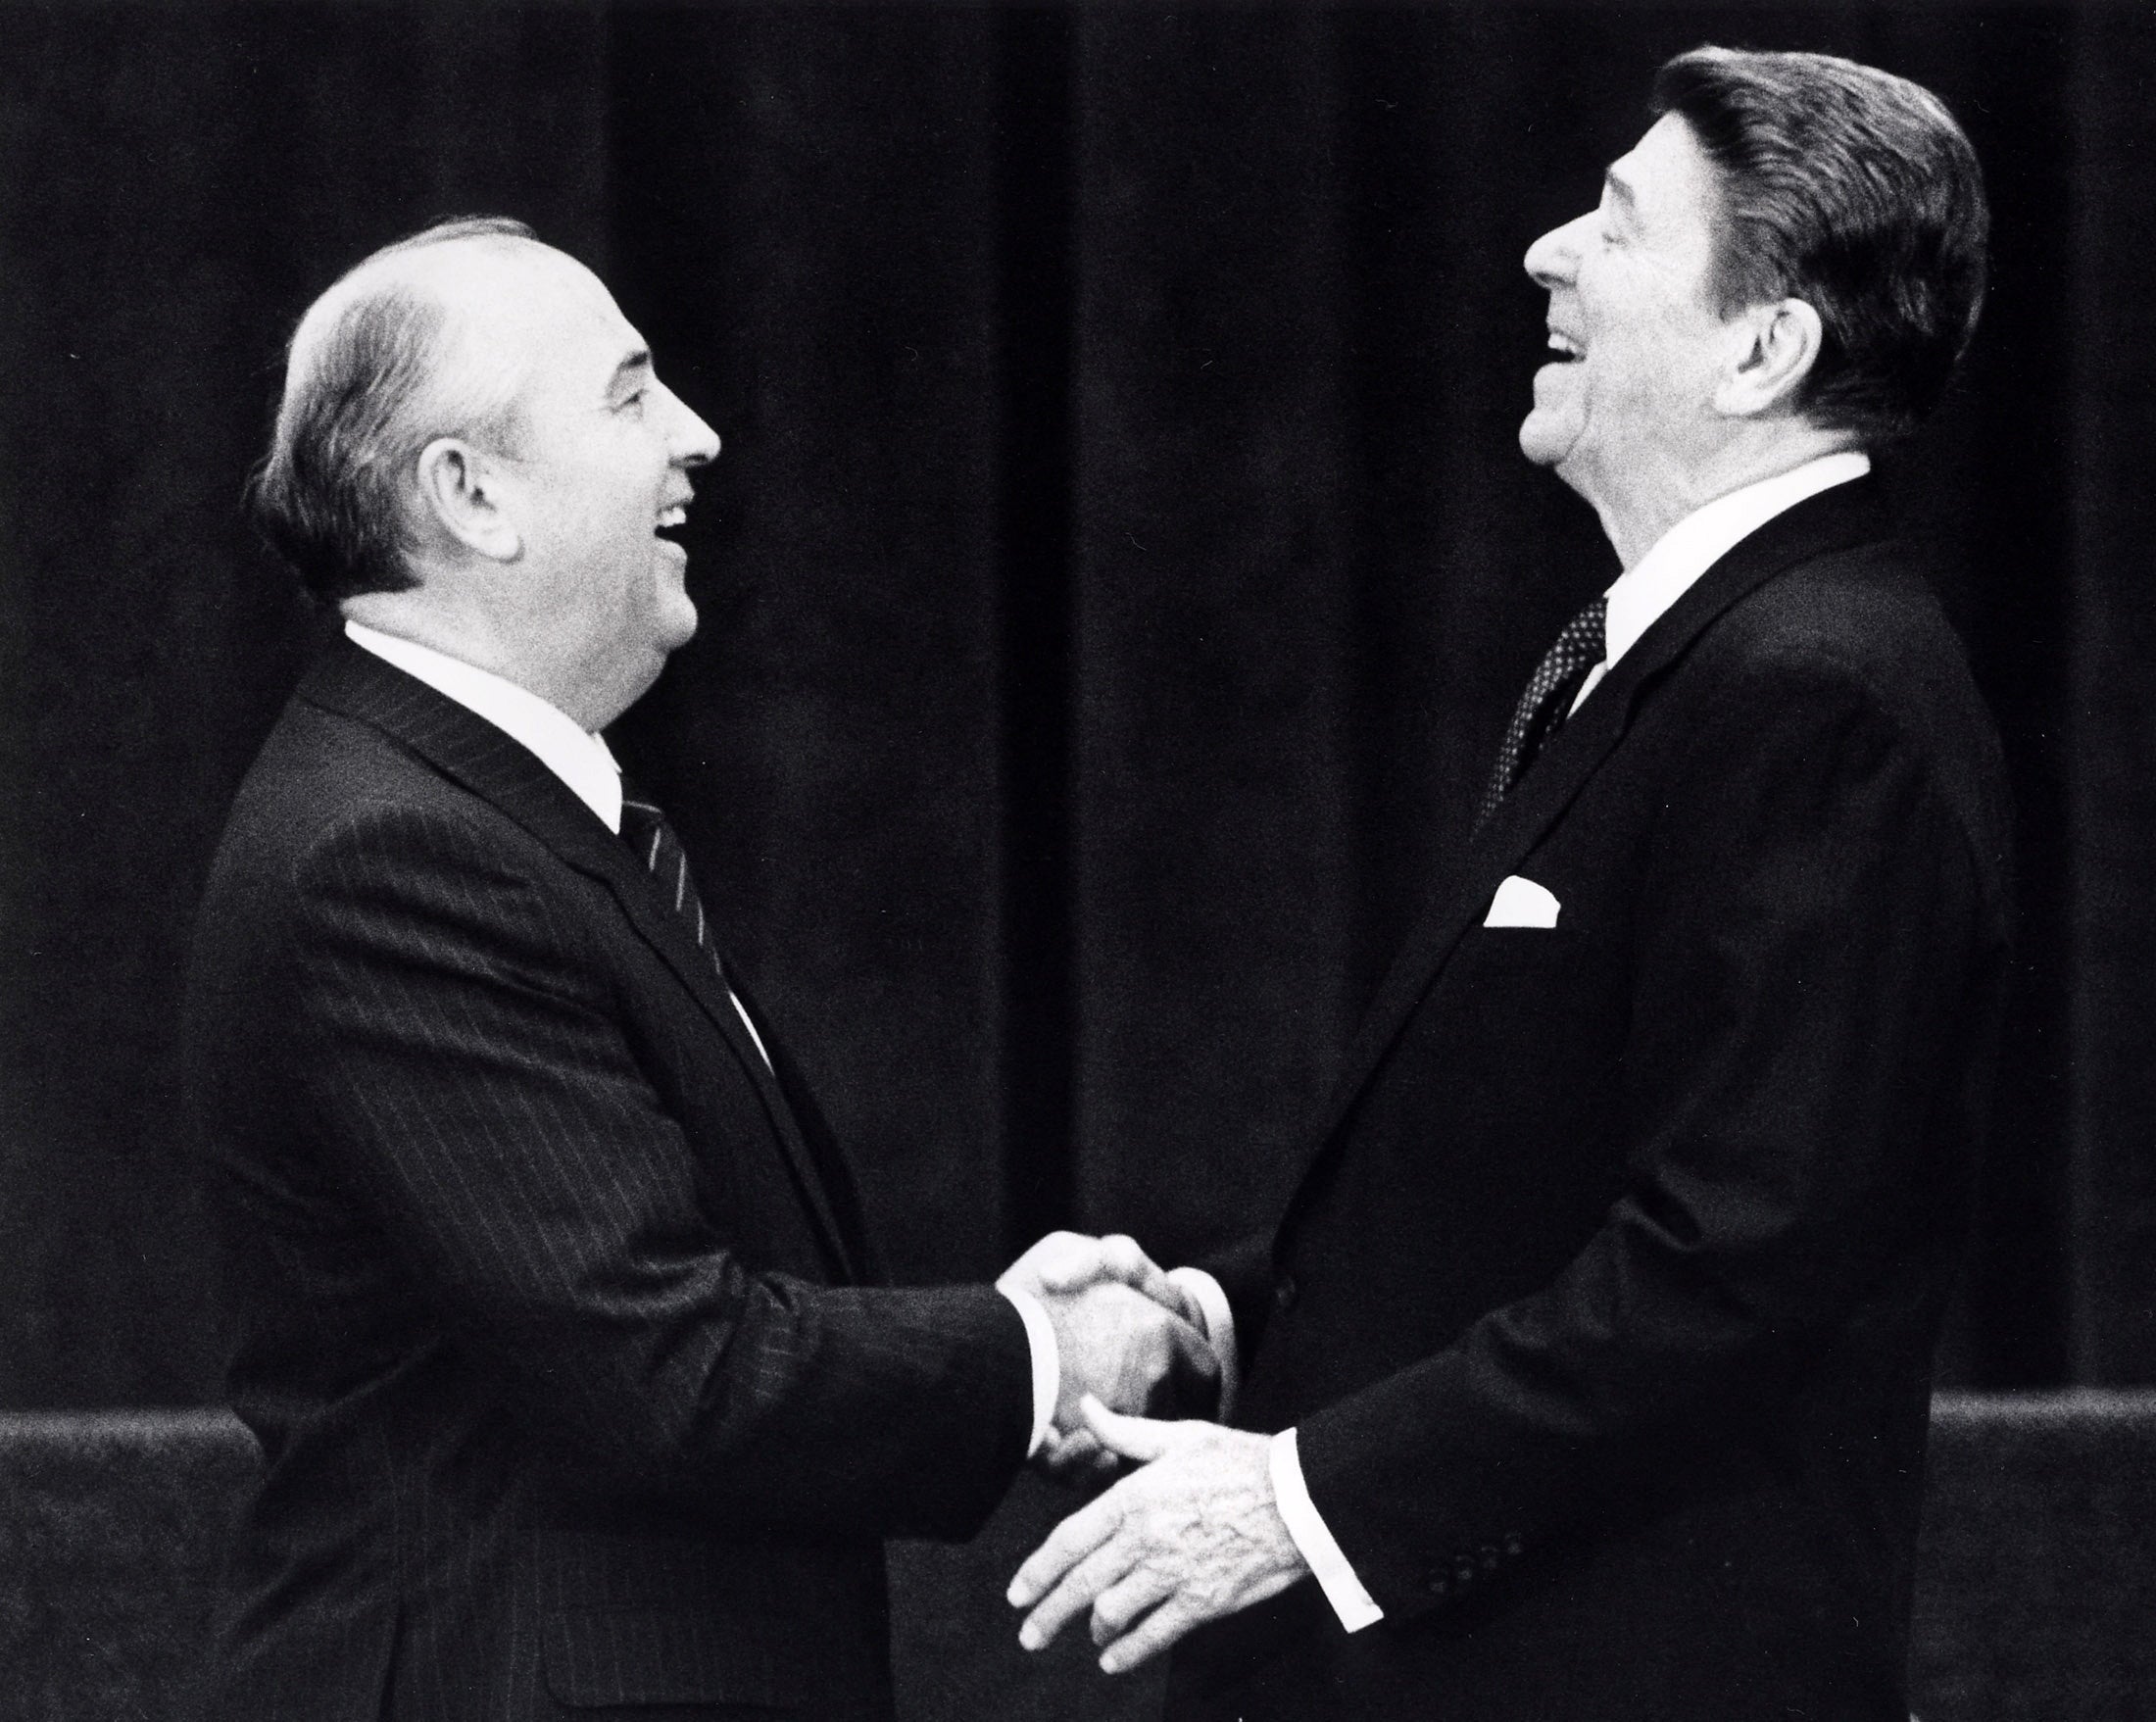 U.S. President Ronald Reagan at his first meeting with former Soviet leader Mikhail Gorbachev in Geneva, Switzerland